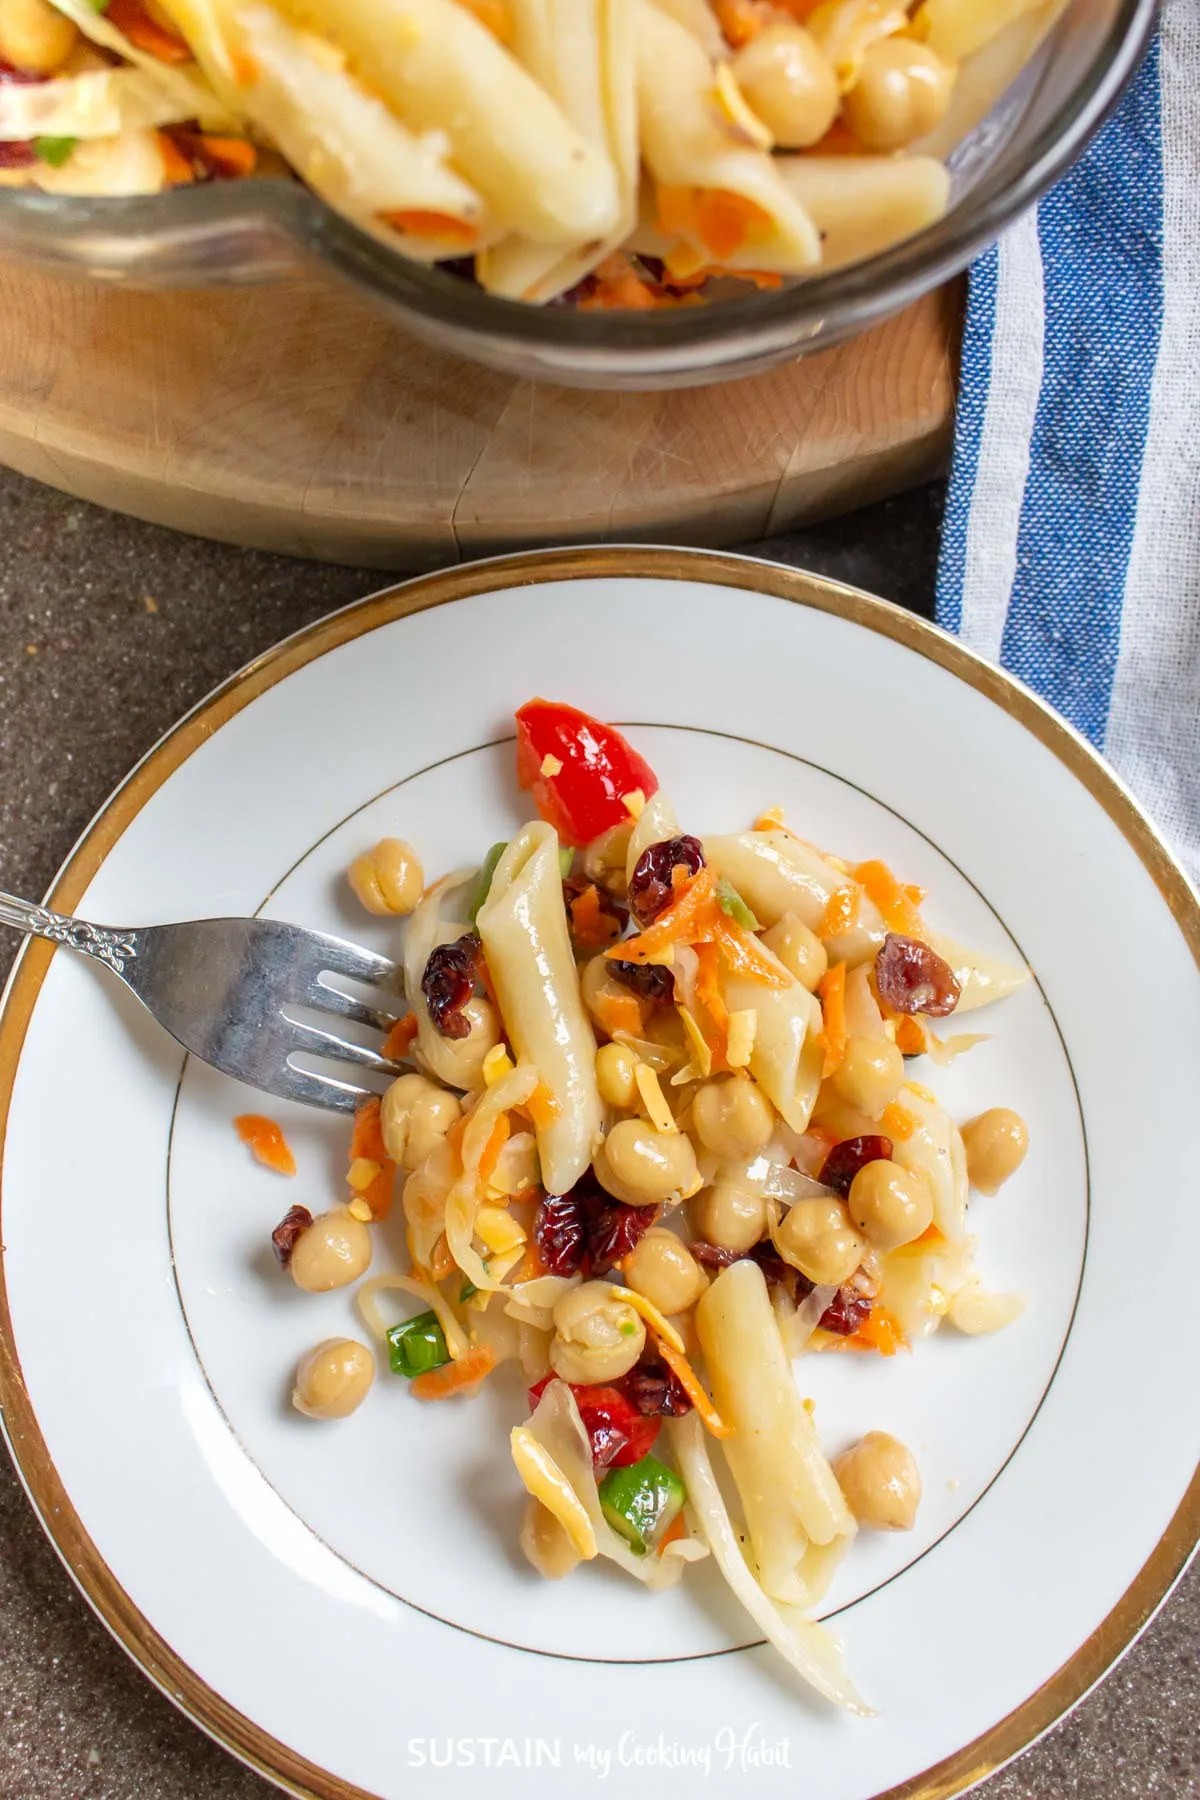 Chickpea pasta salad on a plate.